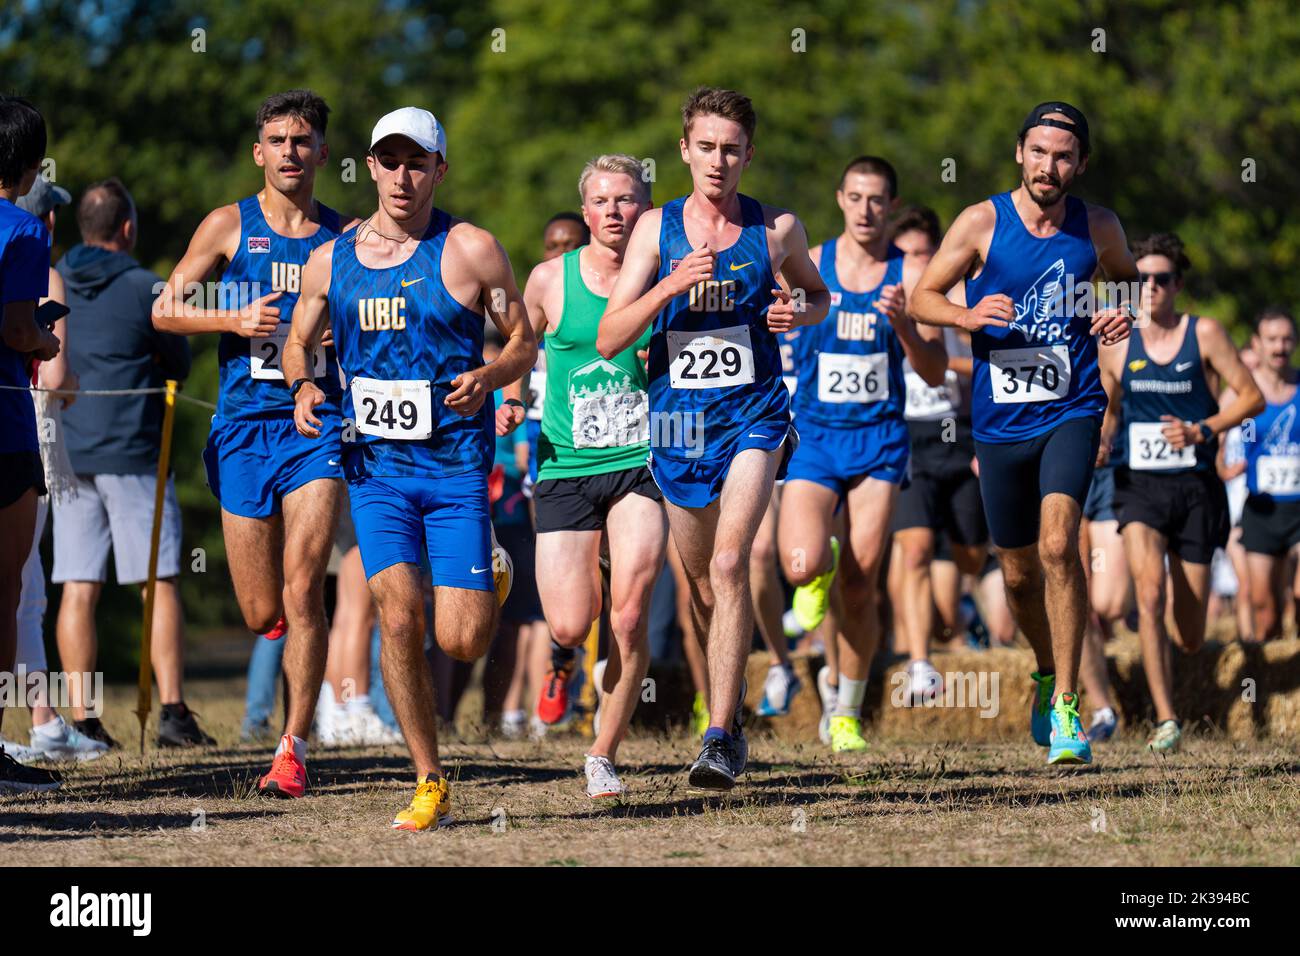 Vancouver, Canada. 25th Sep, 2022. Pictured left to right, Sacha Schimmelpenninck (249) and Jonah Brost (229) of UBC Thunderbirds compete in Open Men’s race at Vancouver Spirit Run. Credit: Zhengmu Wang/Alamy Live News Stock Photo